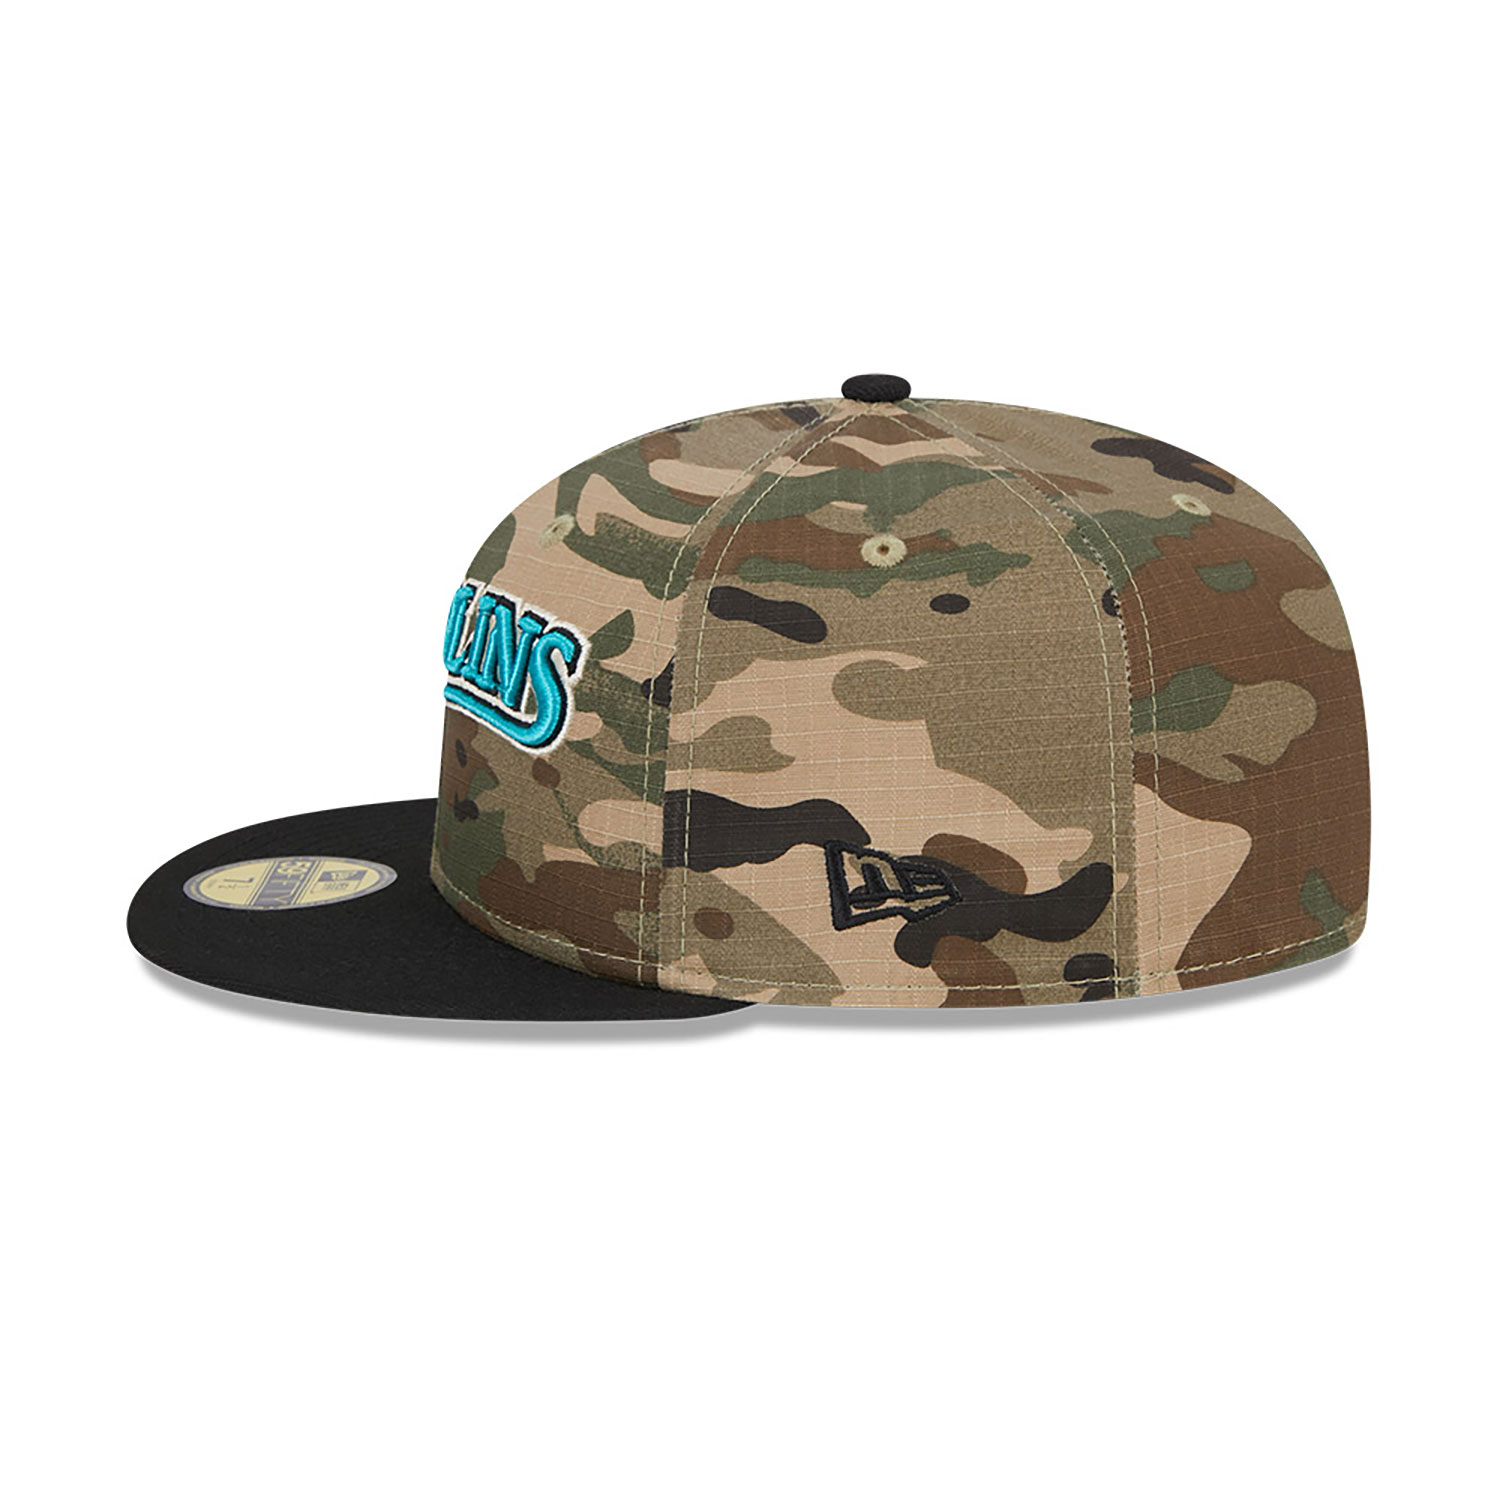 Miami Marlins Camo Crown All Over Print Green 59FIFTY Fitted Cap